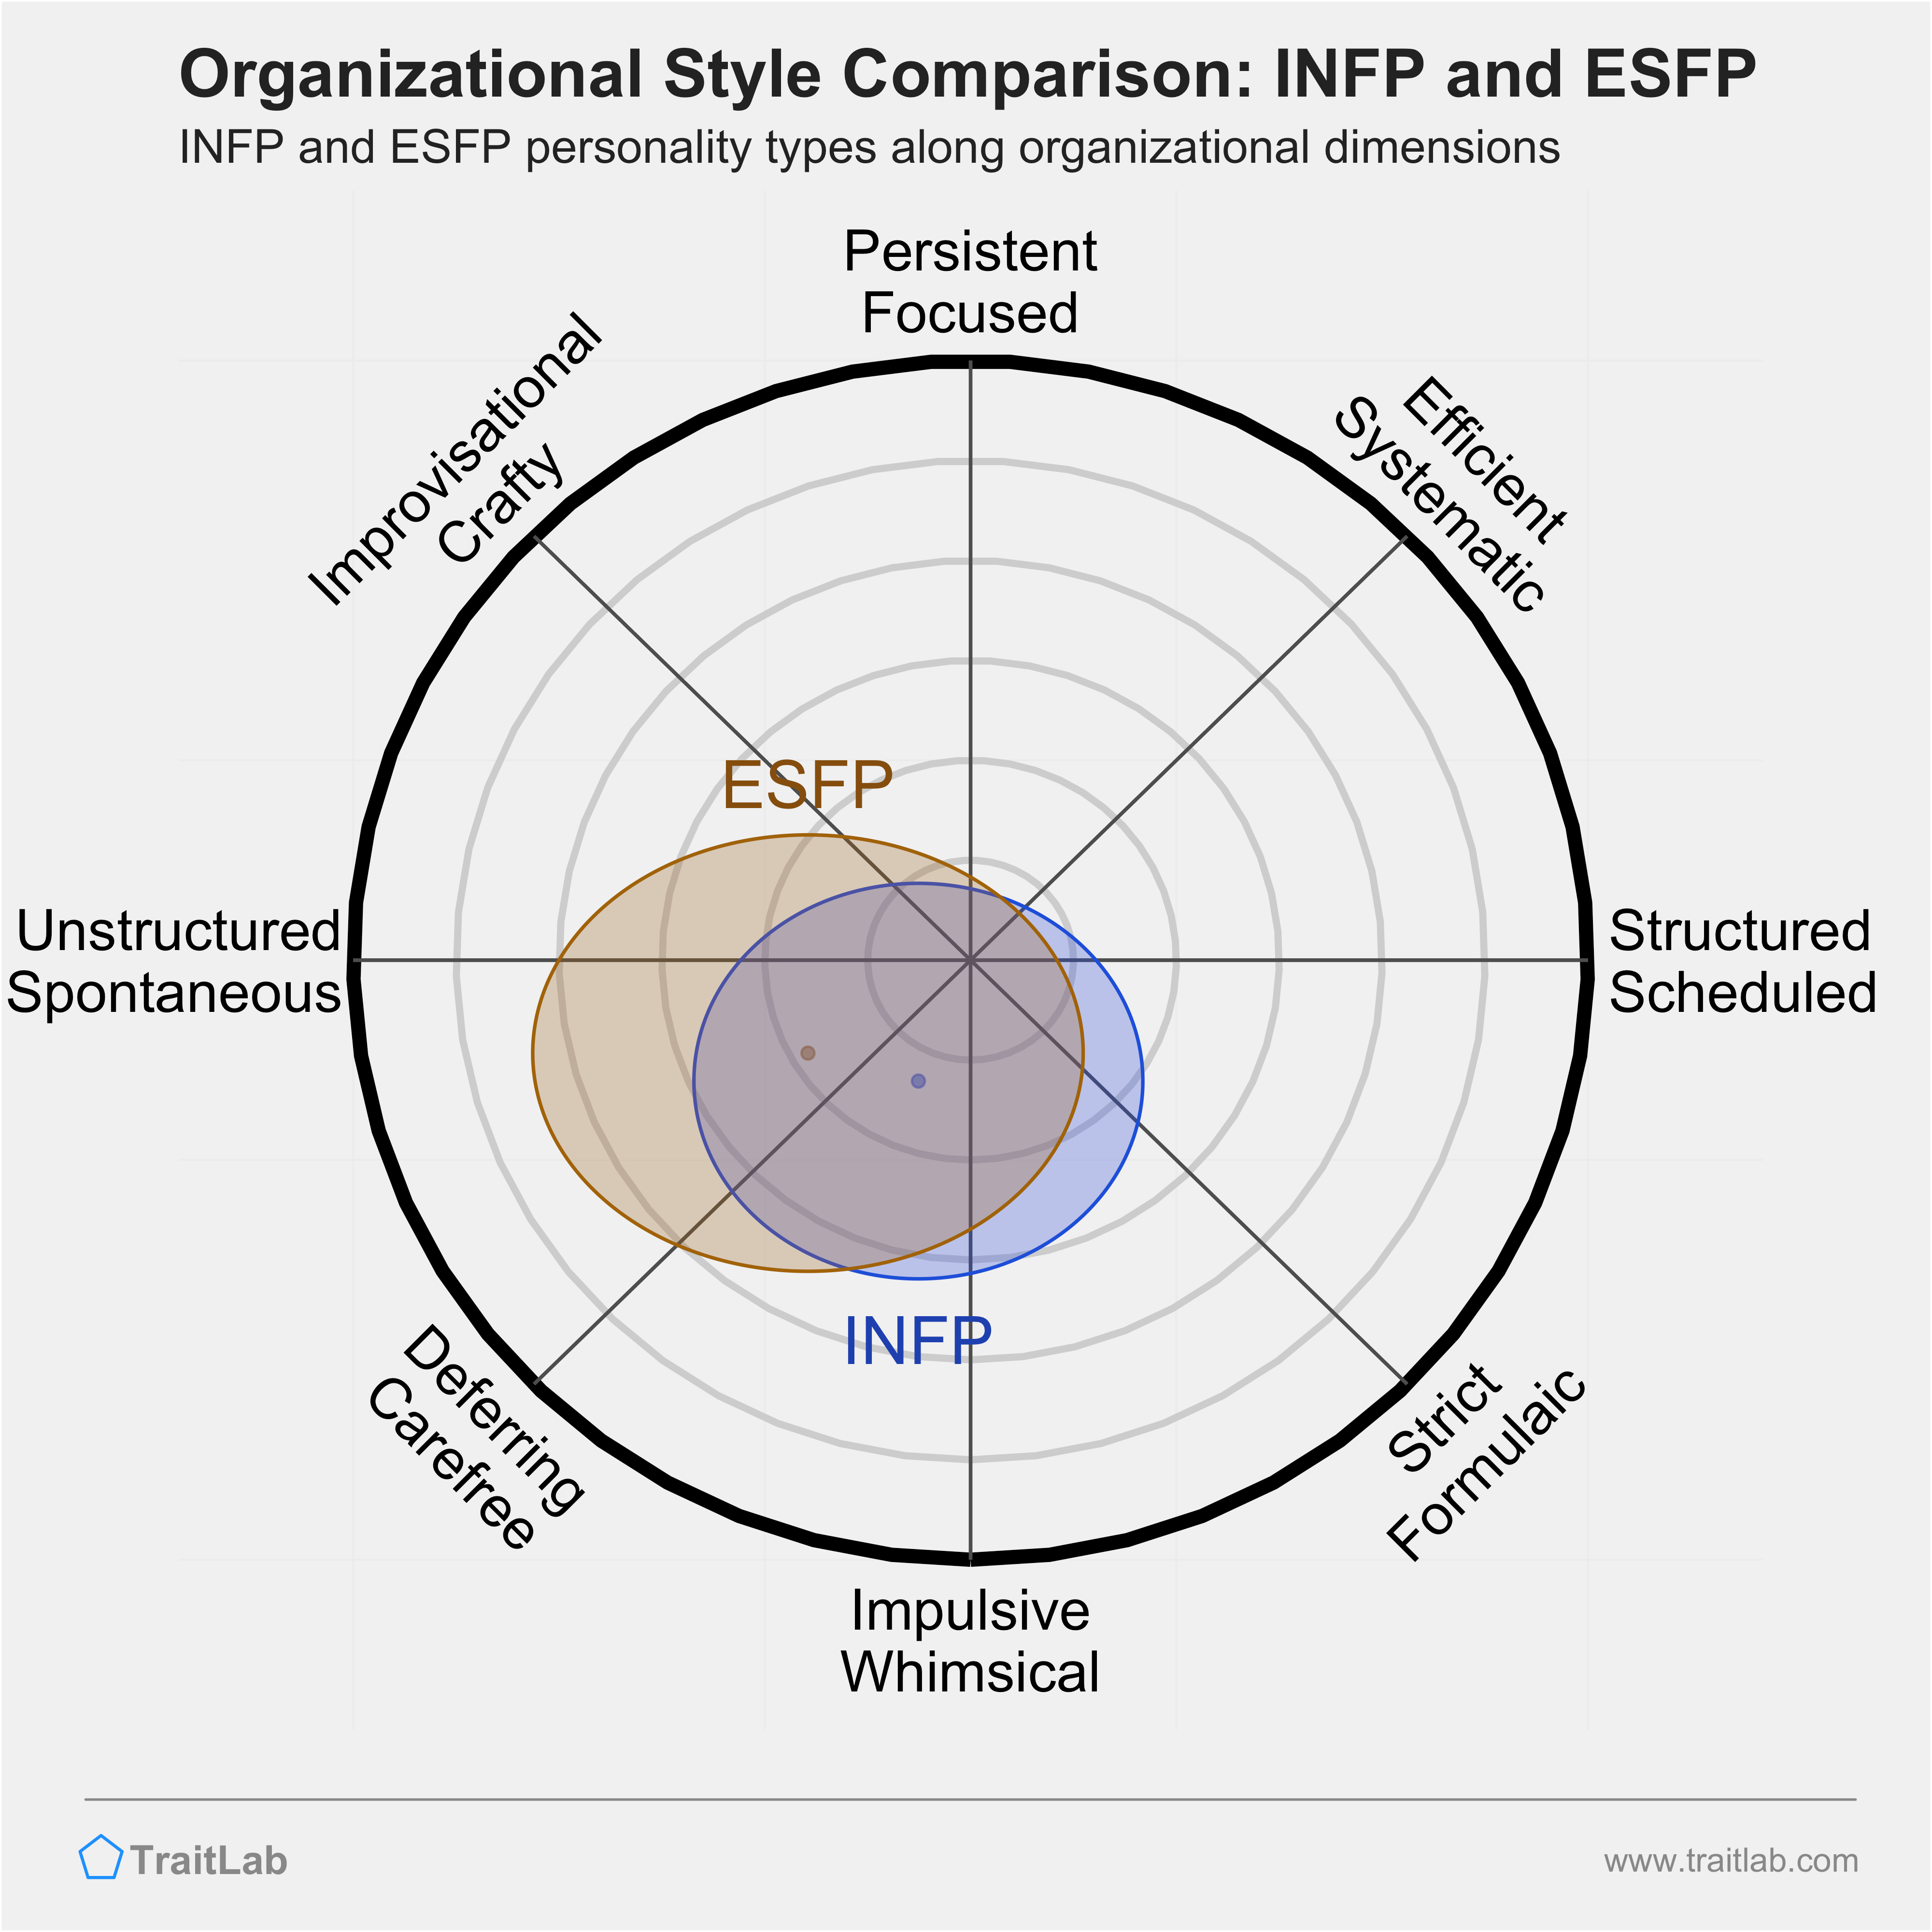 INFP and ESFP comparison across organizational dimensions